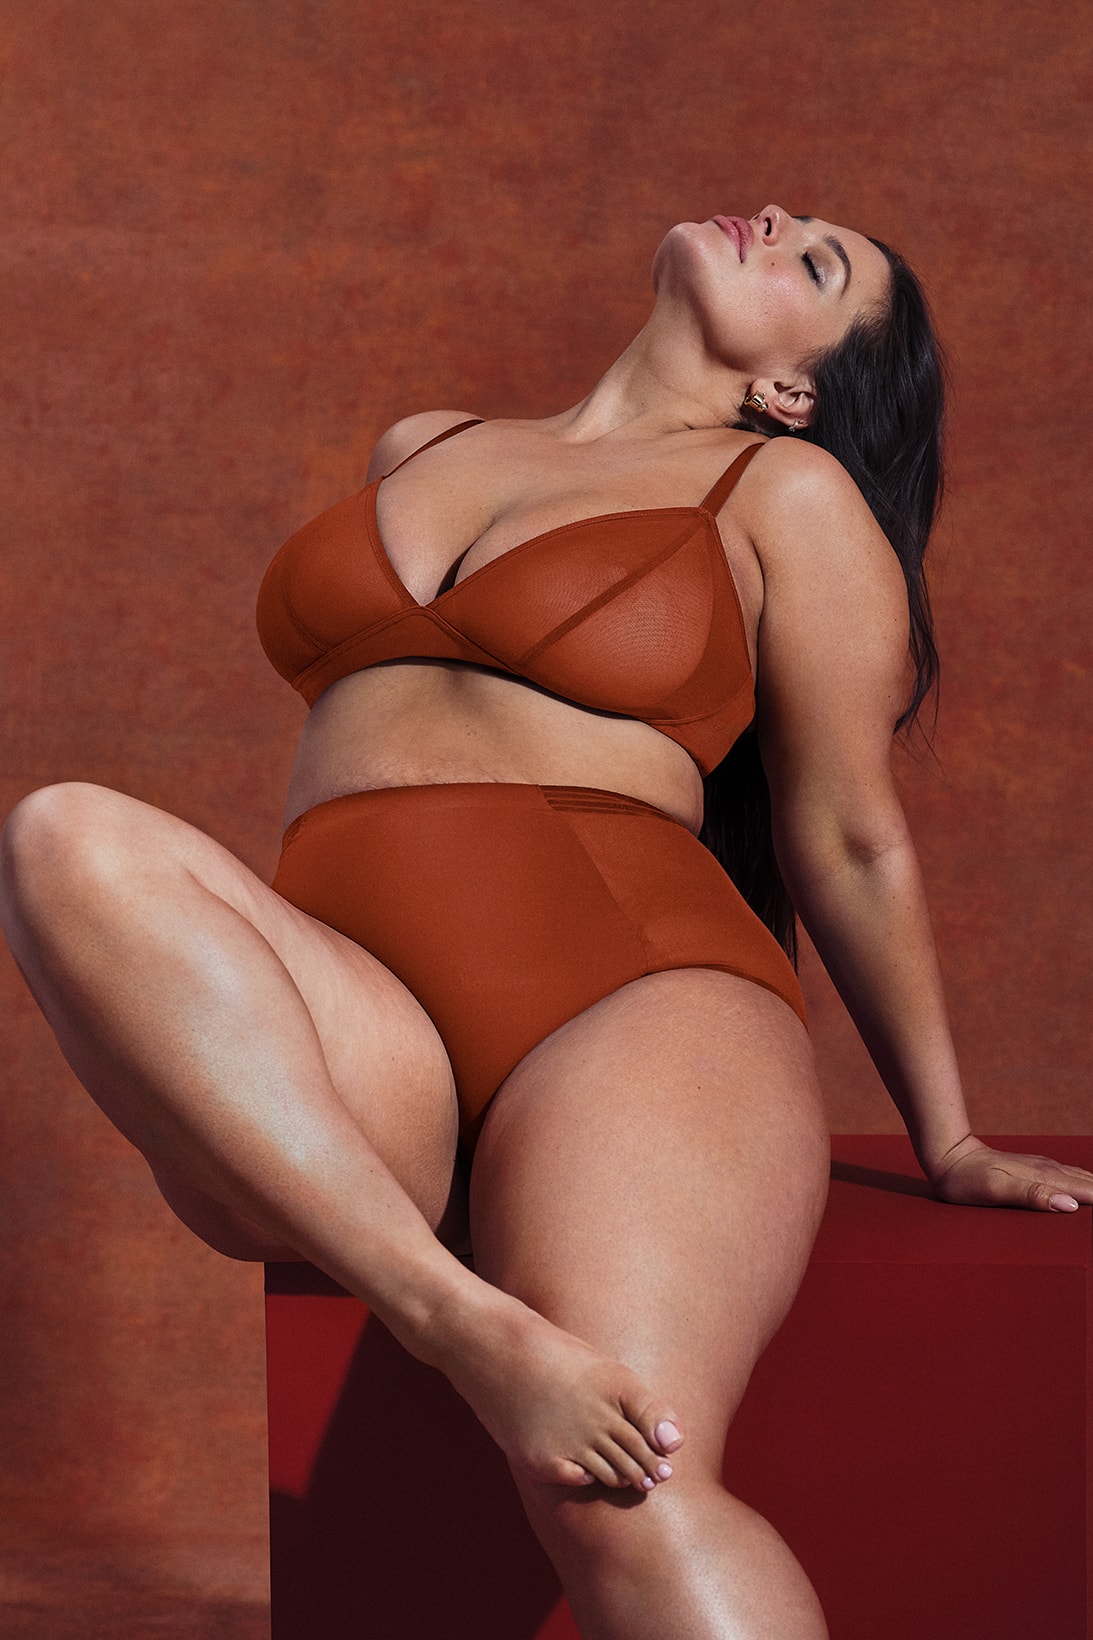 Knix - Supermodel Ashley Graham has been a huge supporter and